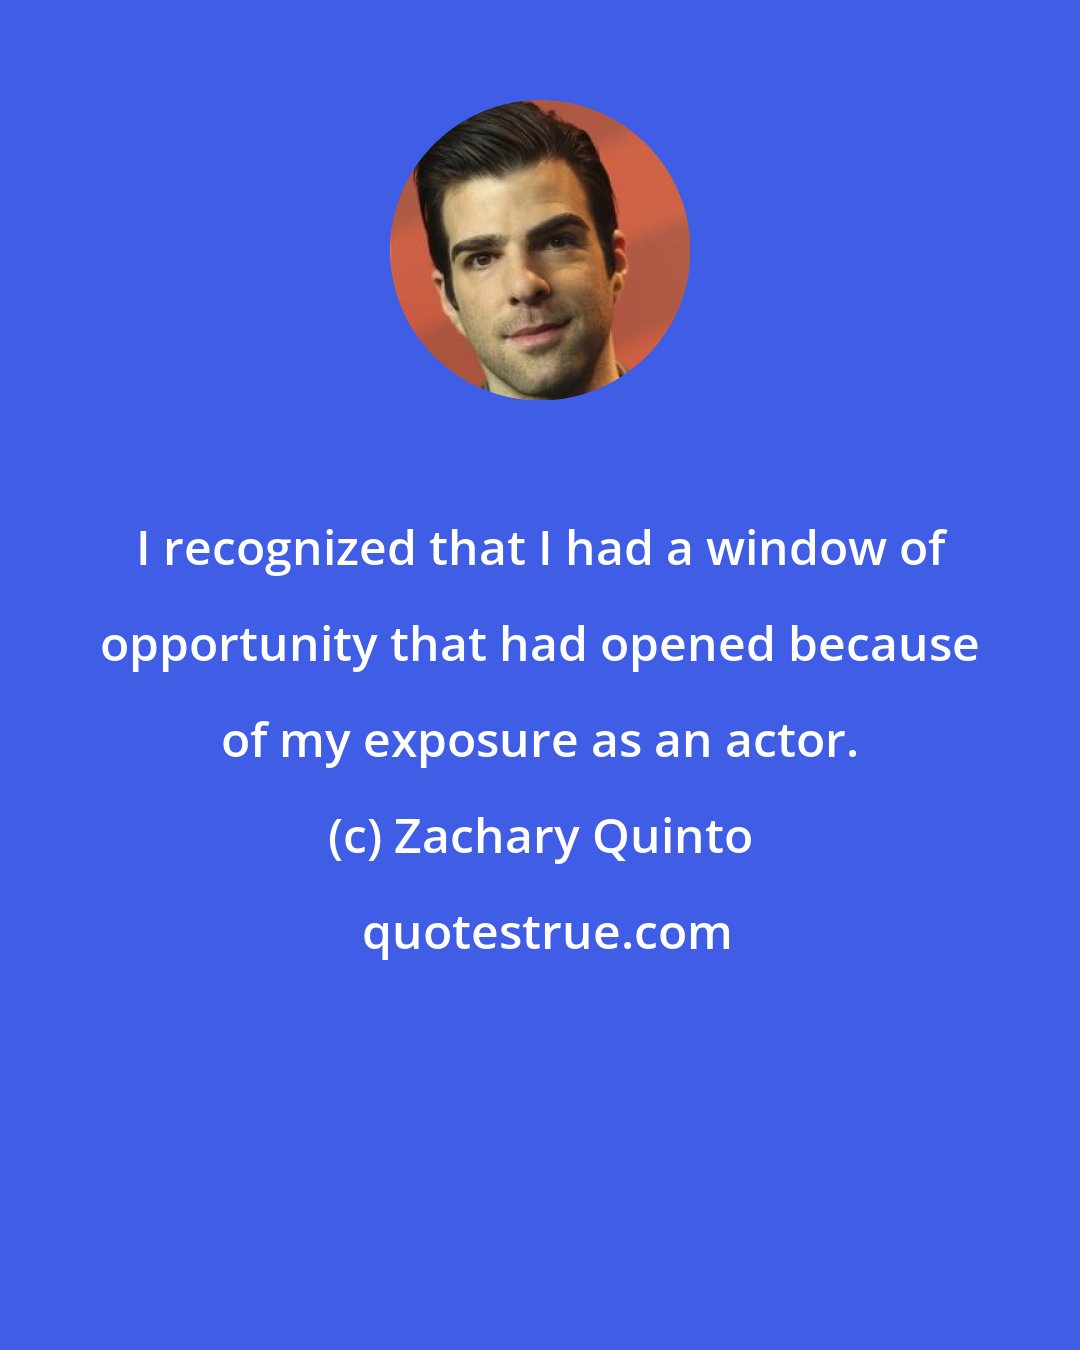 Zachary Quinto: I recognized that I had a window of opportunity that had opened because of my exposure as an actor.